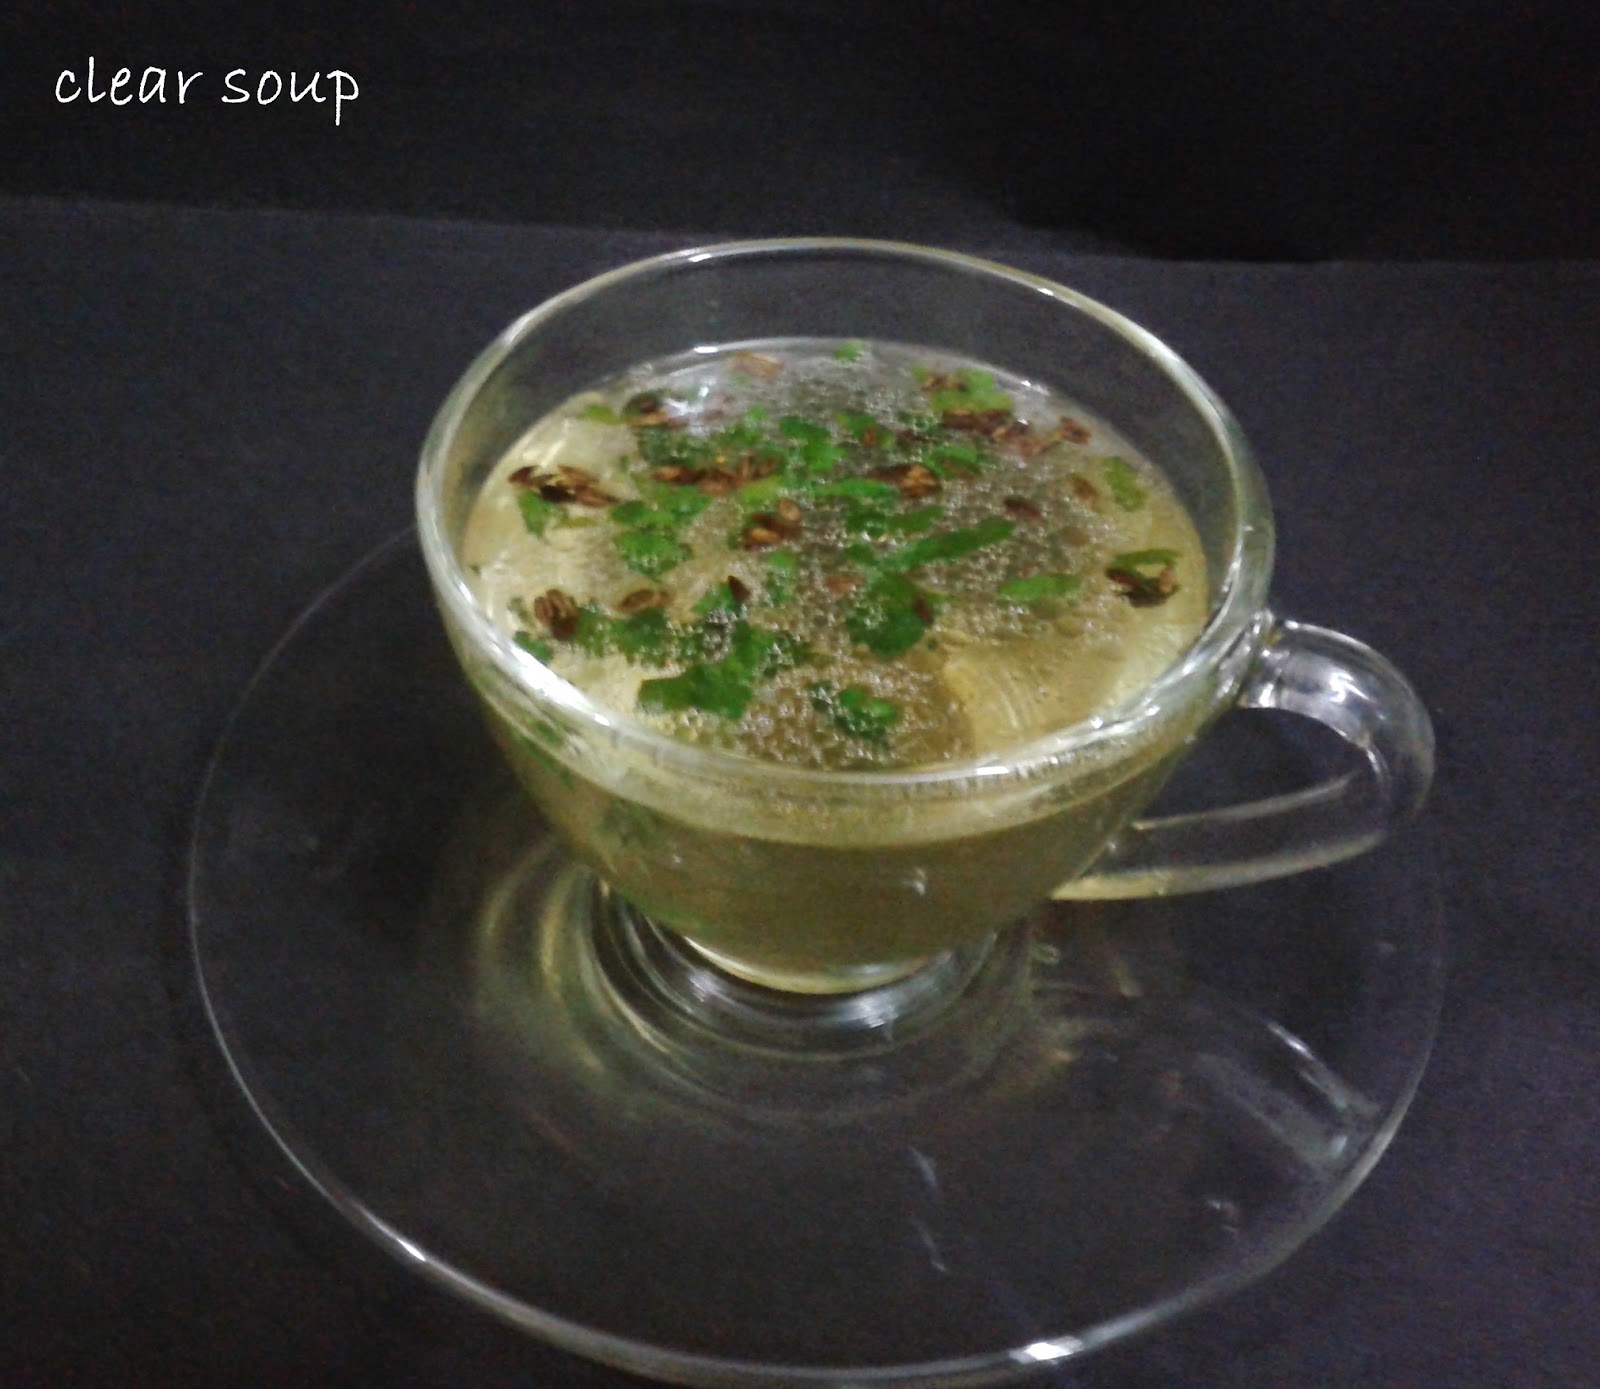 http://www.paakvidhi.com/2015/01/clear-soup.html